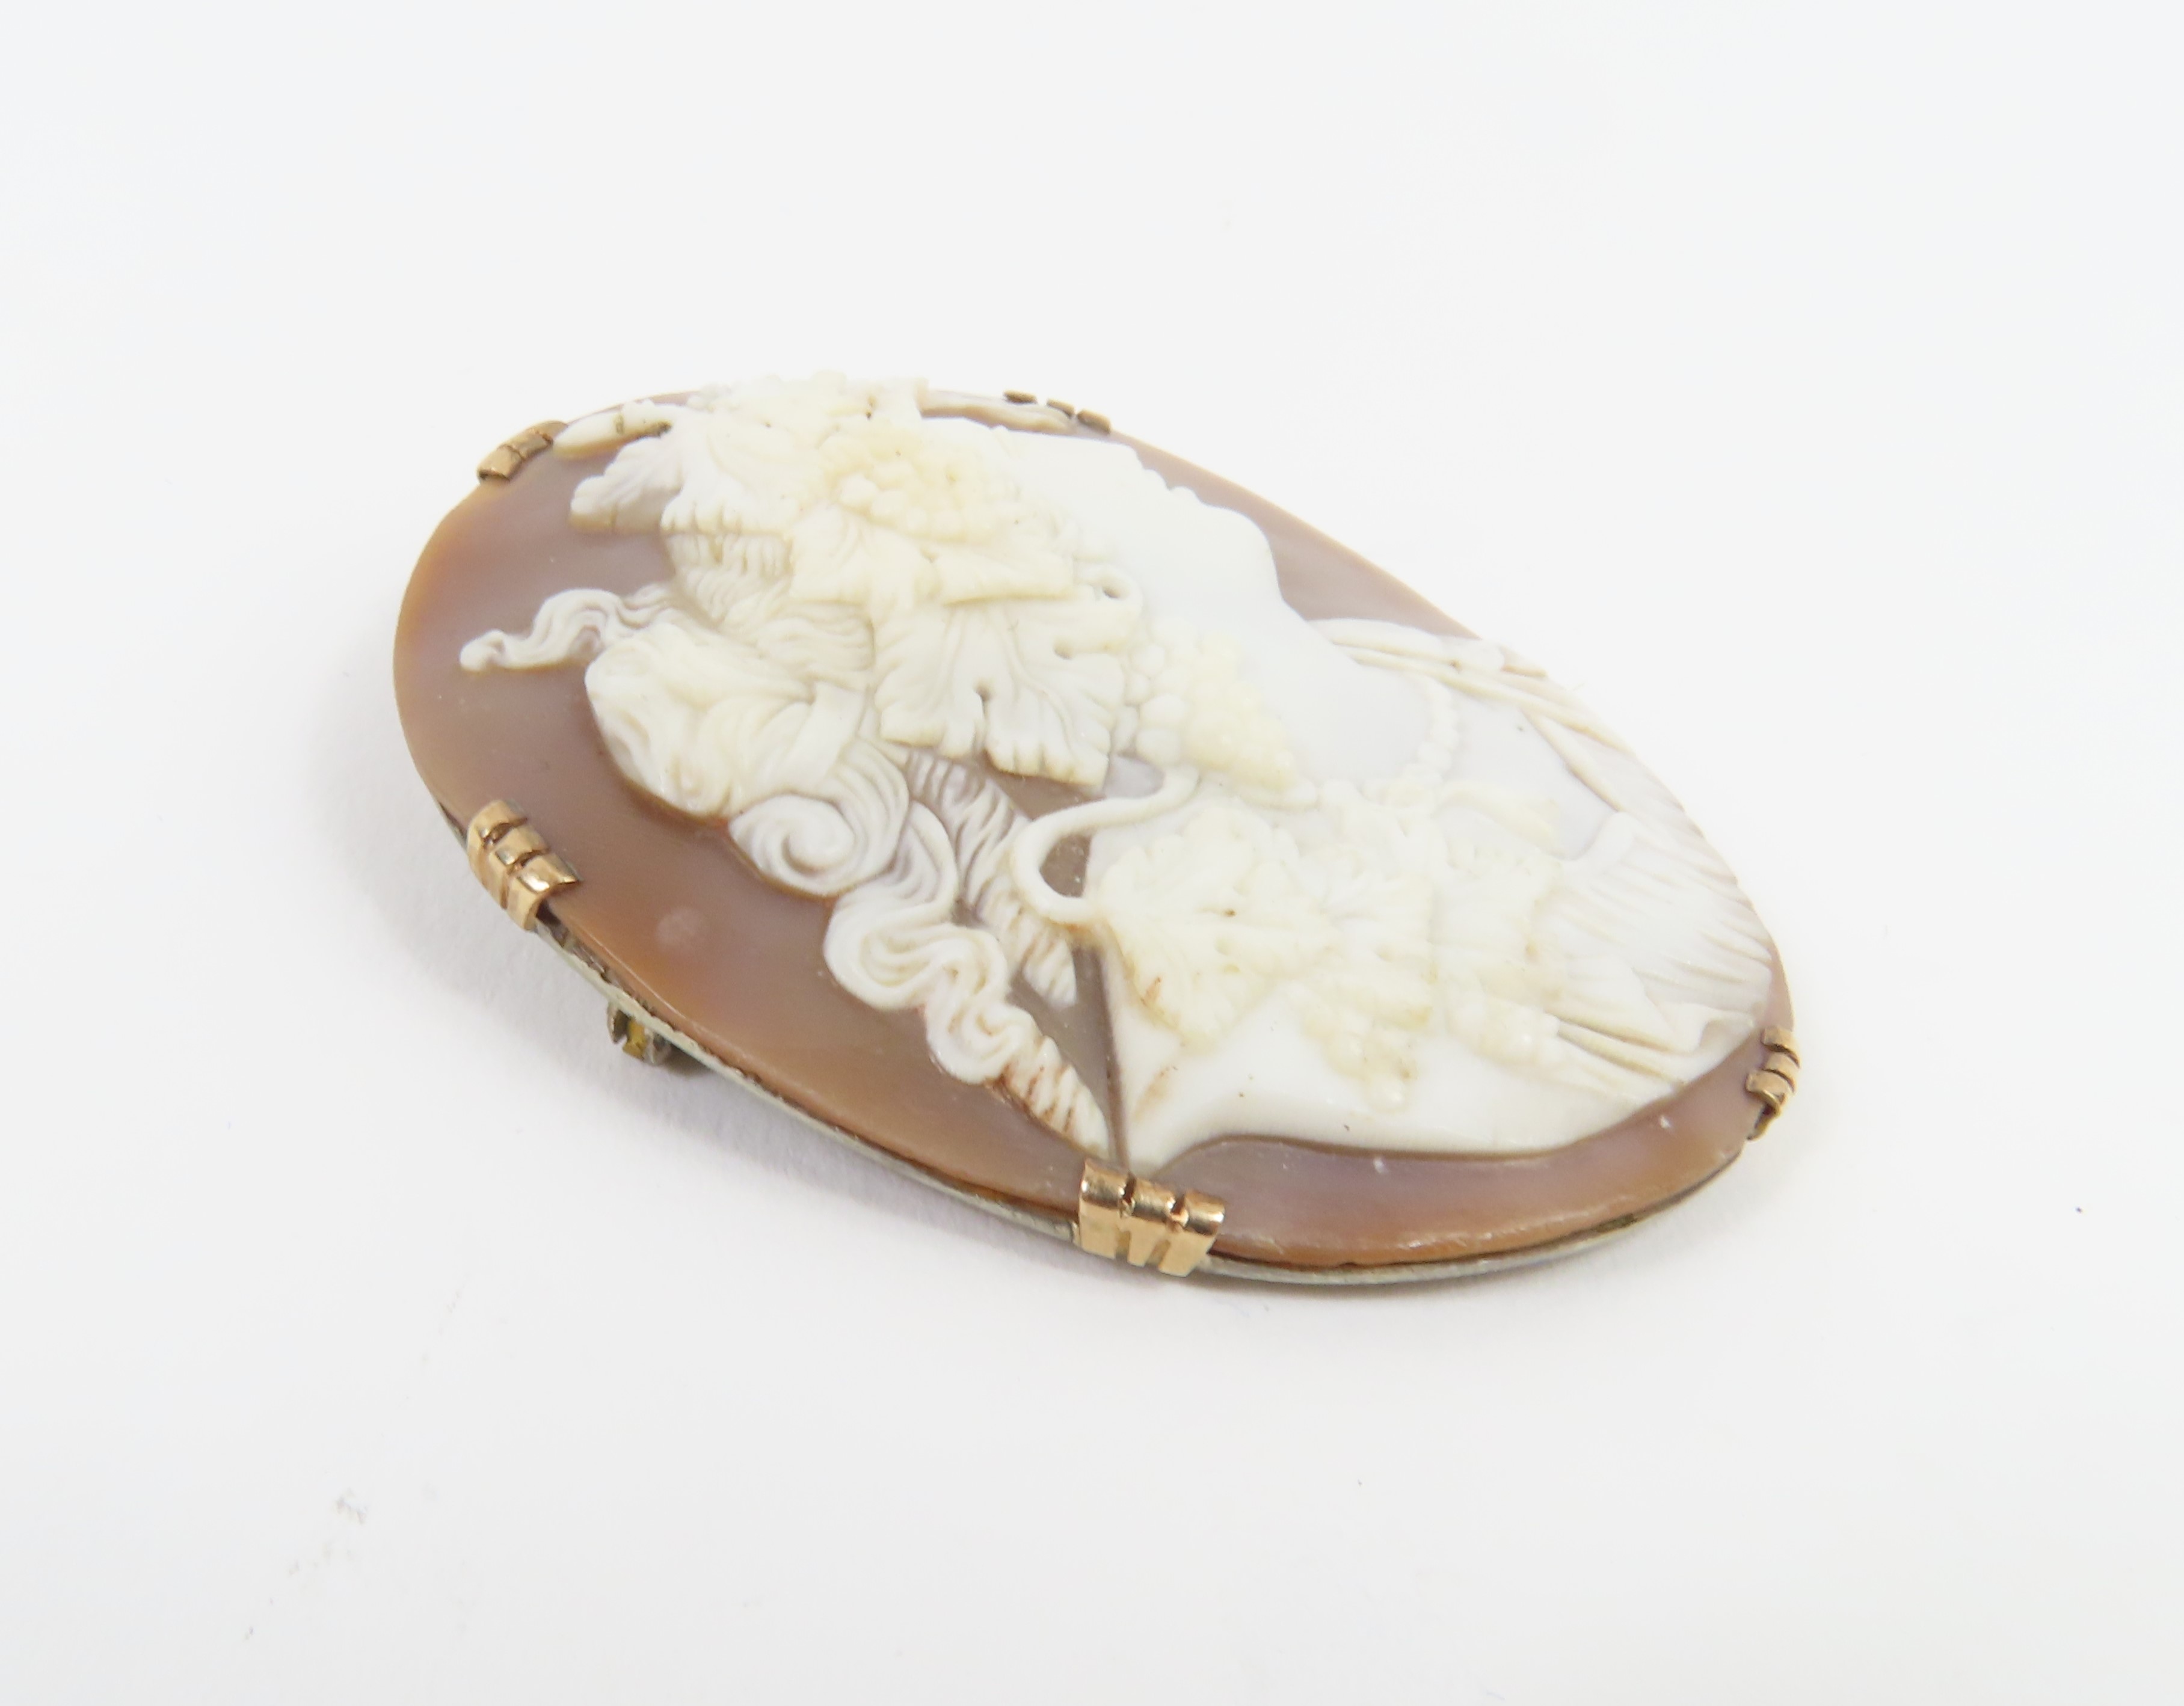 A loose orange shell cameo of Hermes, 3.8cm x 3cm; - Image 5 of 8